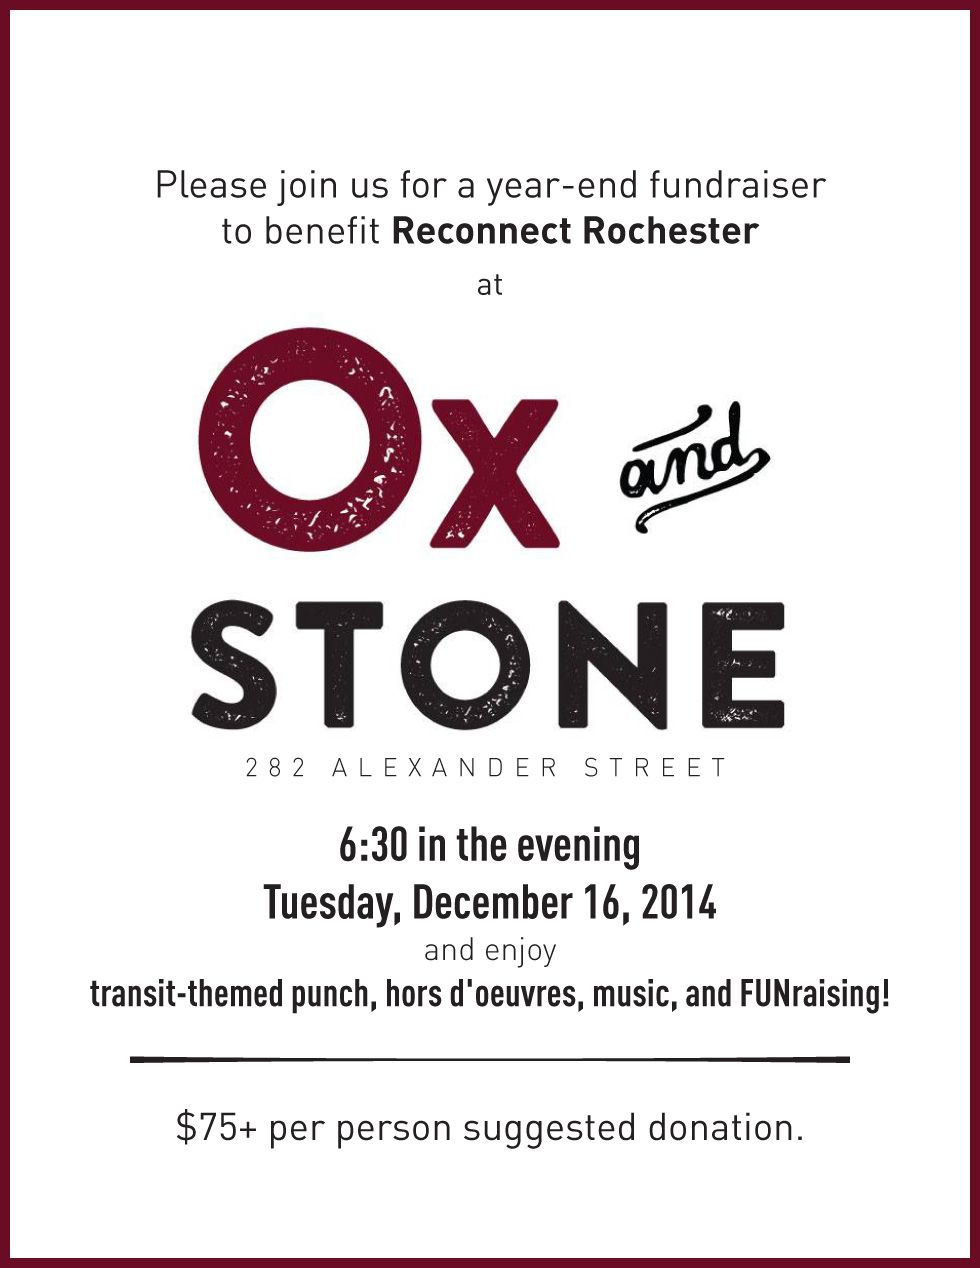 Join Us for a FUNraiser at Ox and Stone